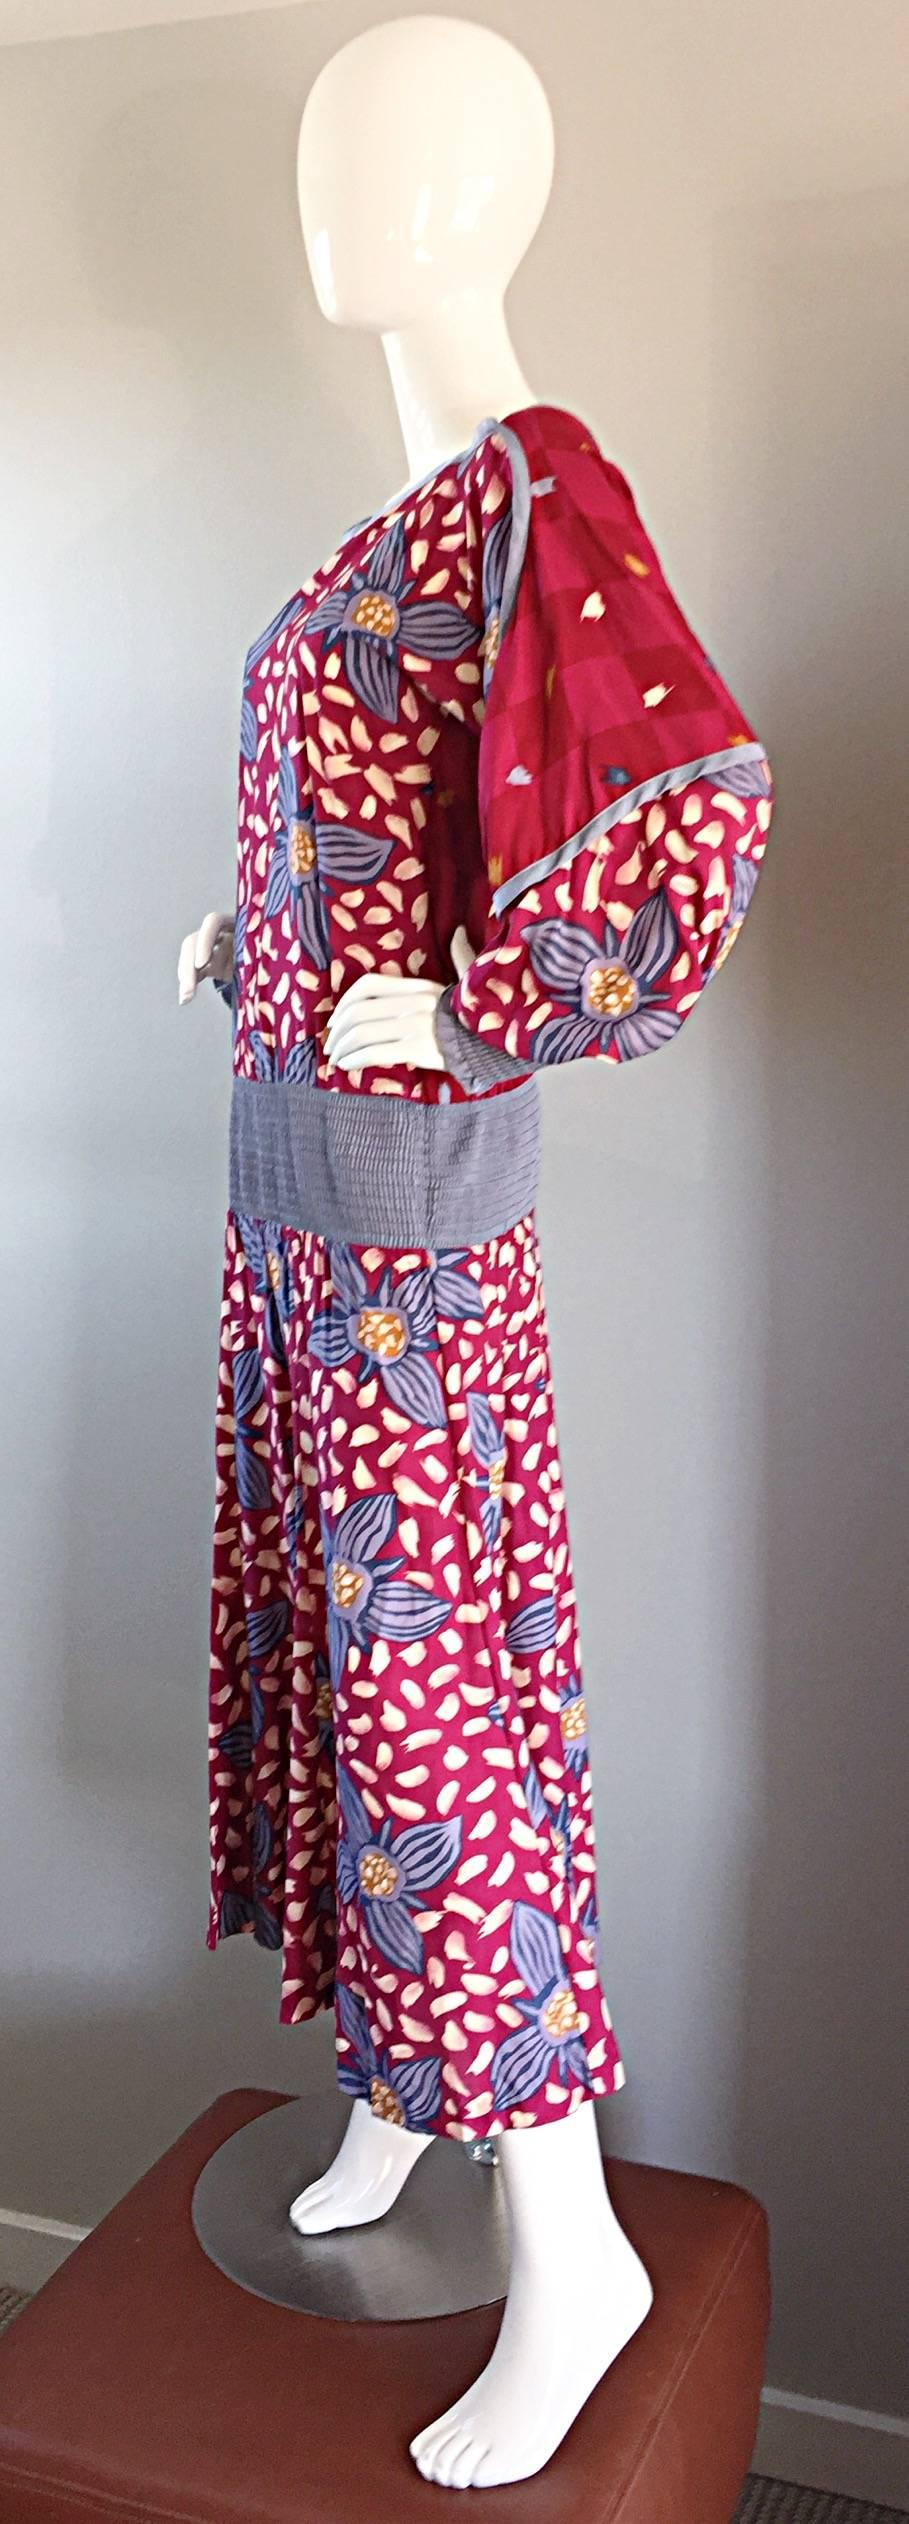 Amazing vintage JEANNE MARC drop waist boho dress! Raspberry pink background, with blue flowers, and paintbrush-like strokes throughout. Denim colored elastic waistband, with matching sleeve cuffs. Dolman sleeve bodice, so will fit many sizes. Has a